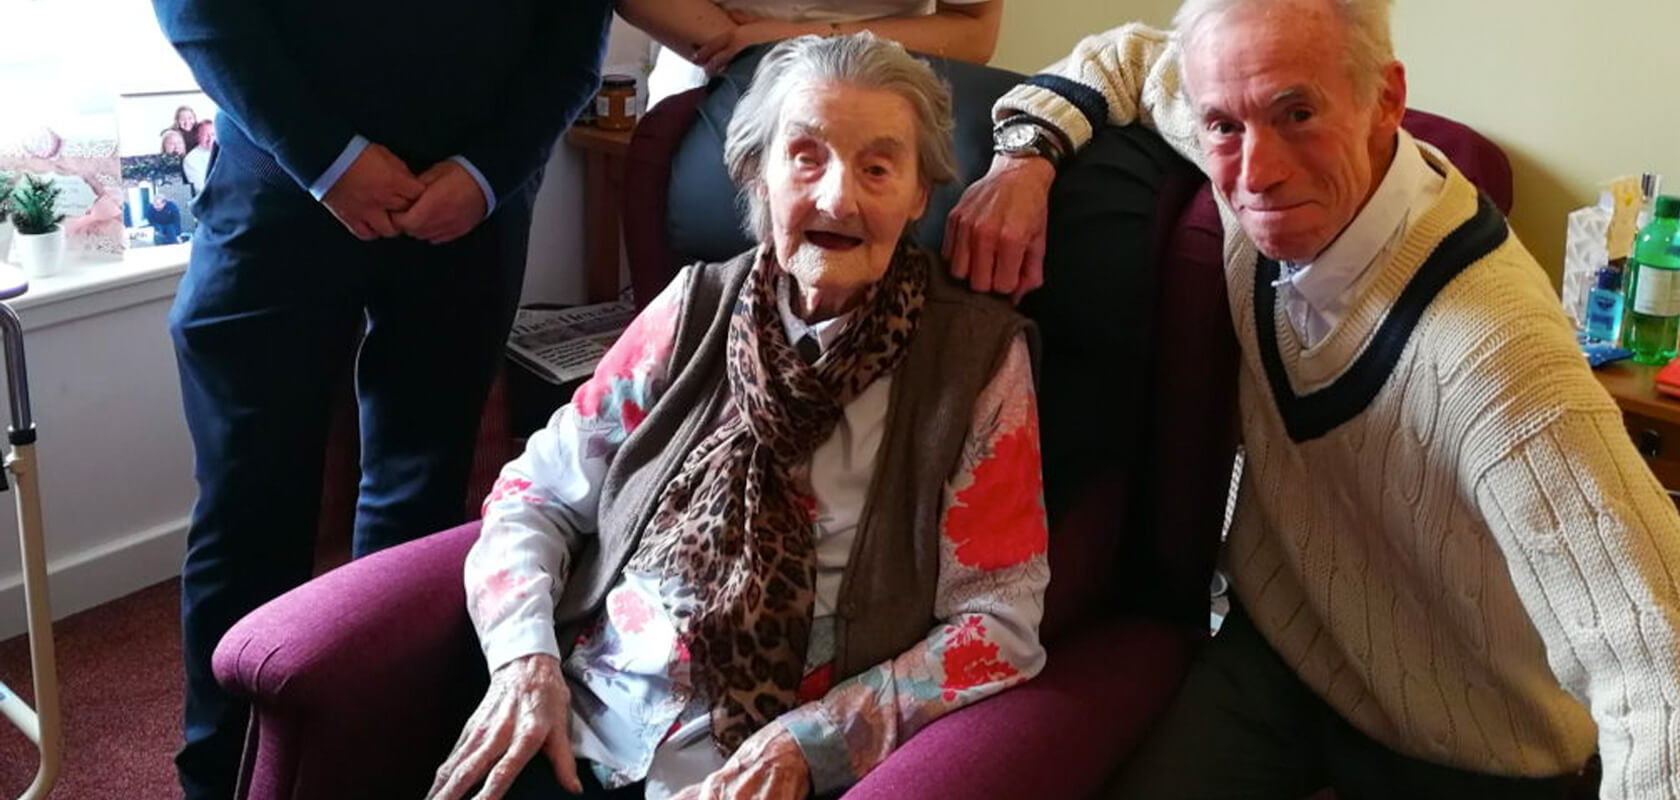 Recliners Chair Gifted to Scotland’s Oldest Woman